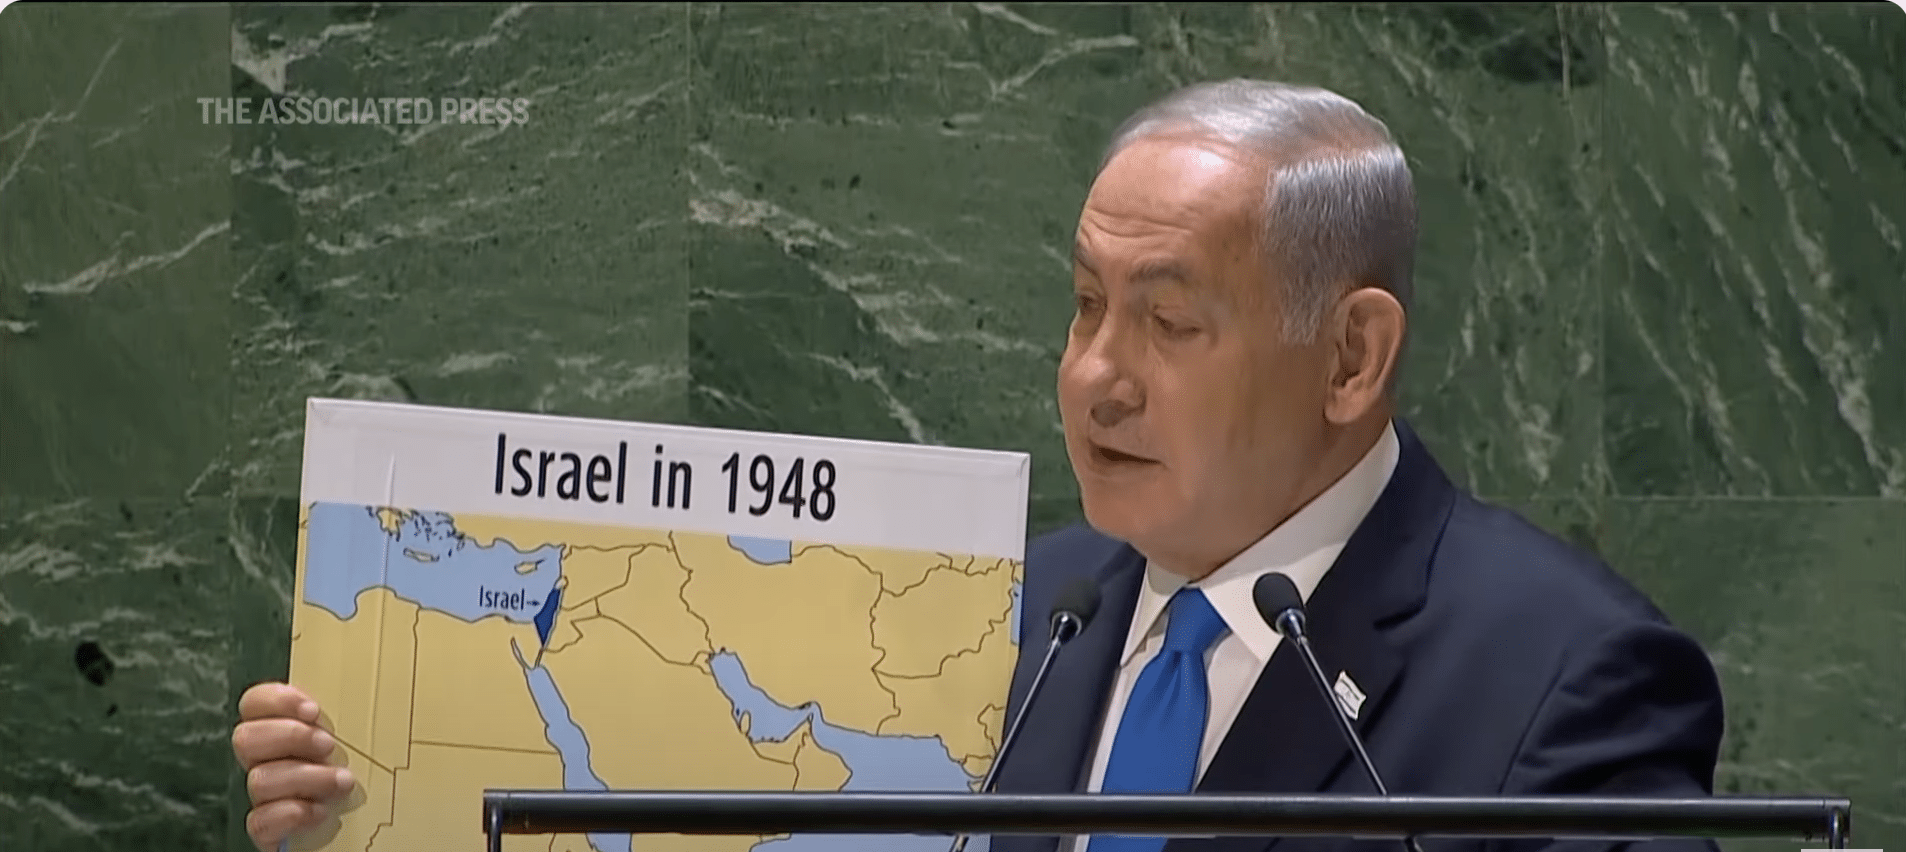 Netanyahu tells UN that Israel is ‘at the cusp’ of a historic agreement with Saudi Arabia